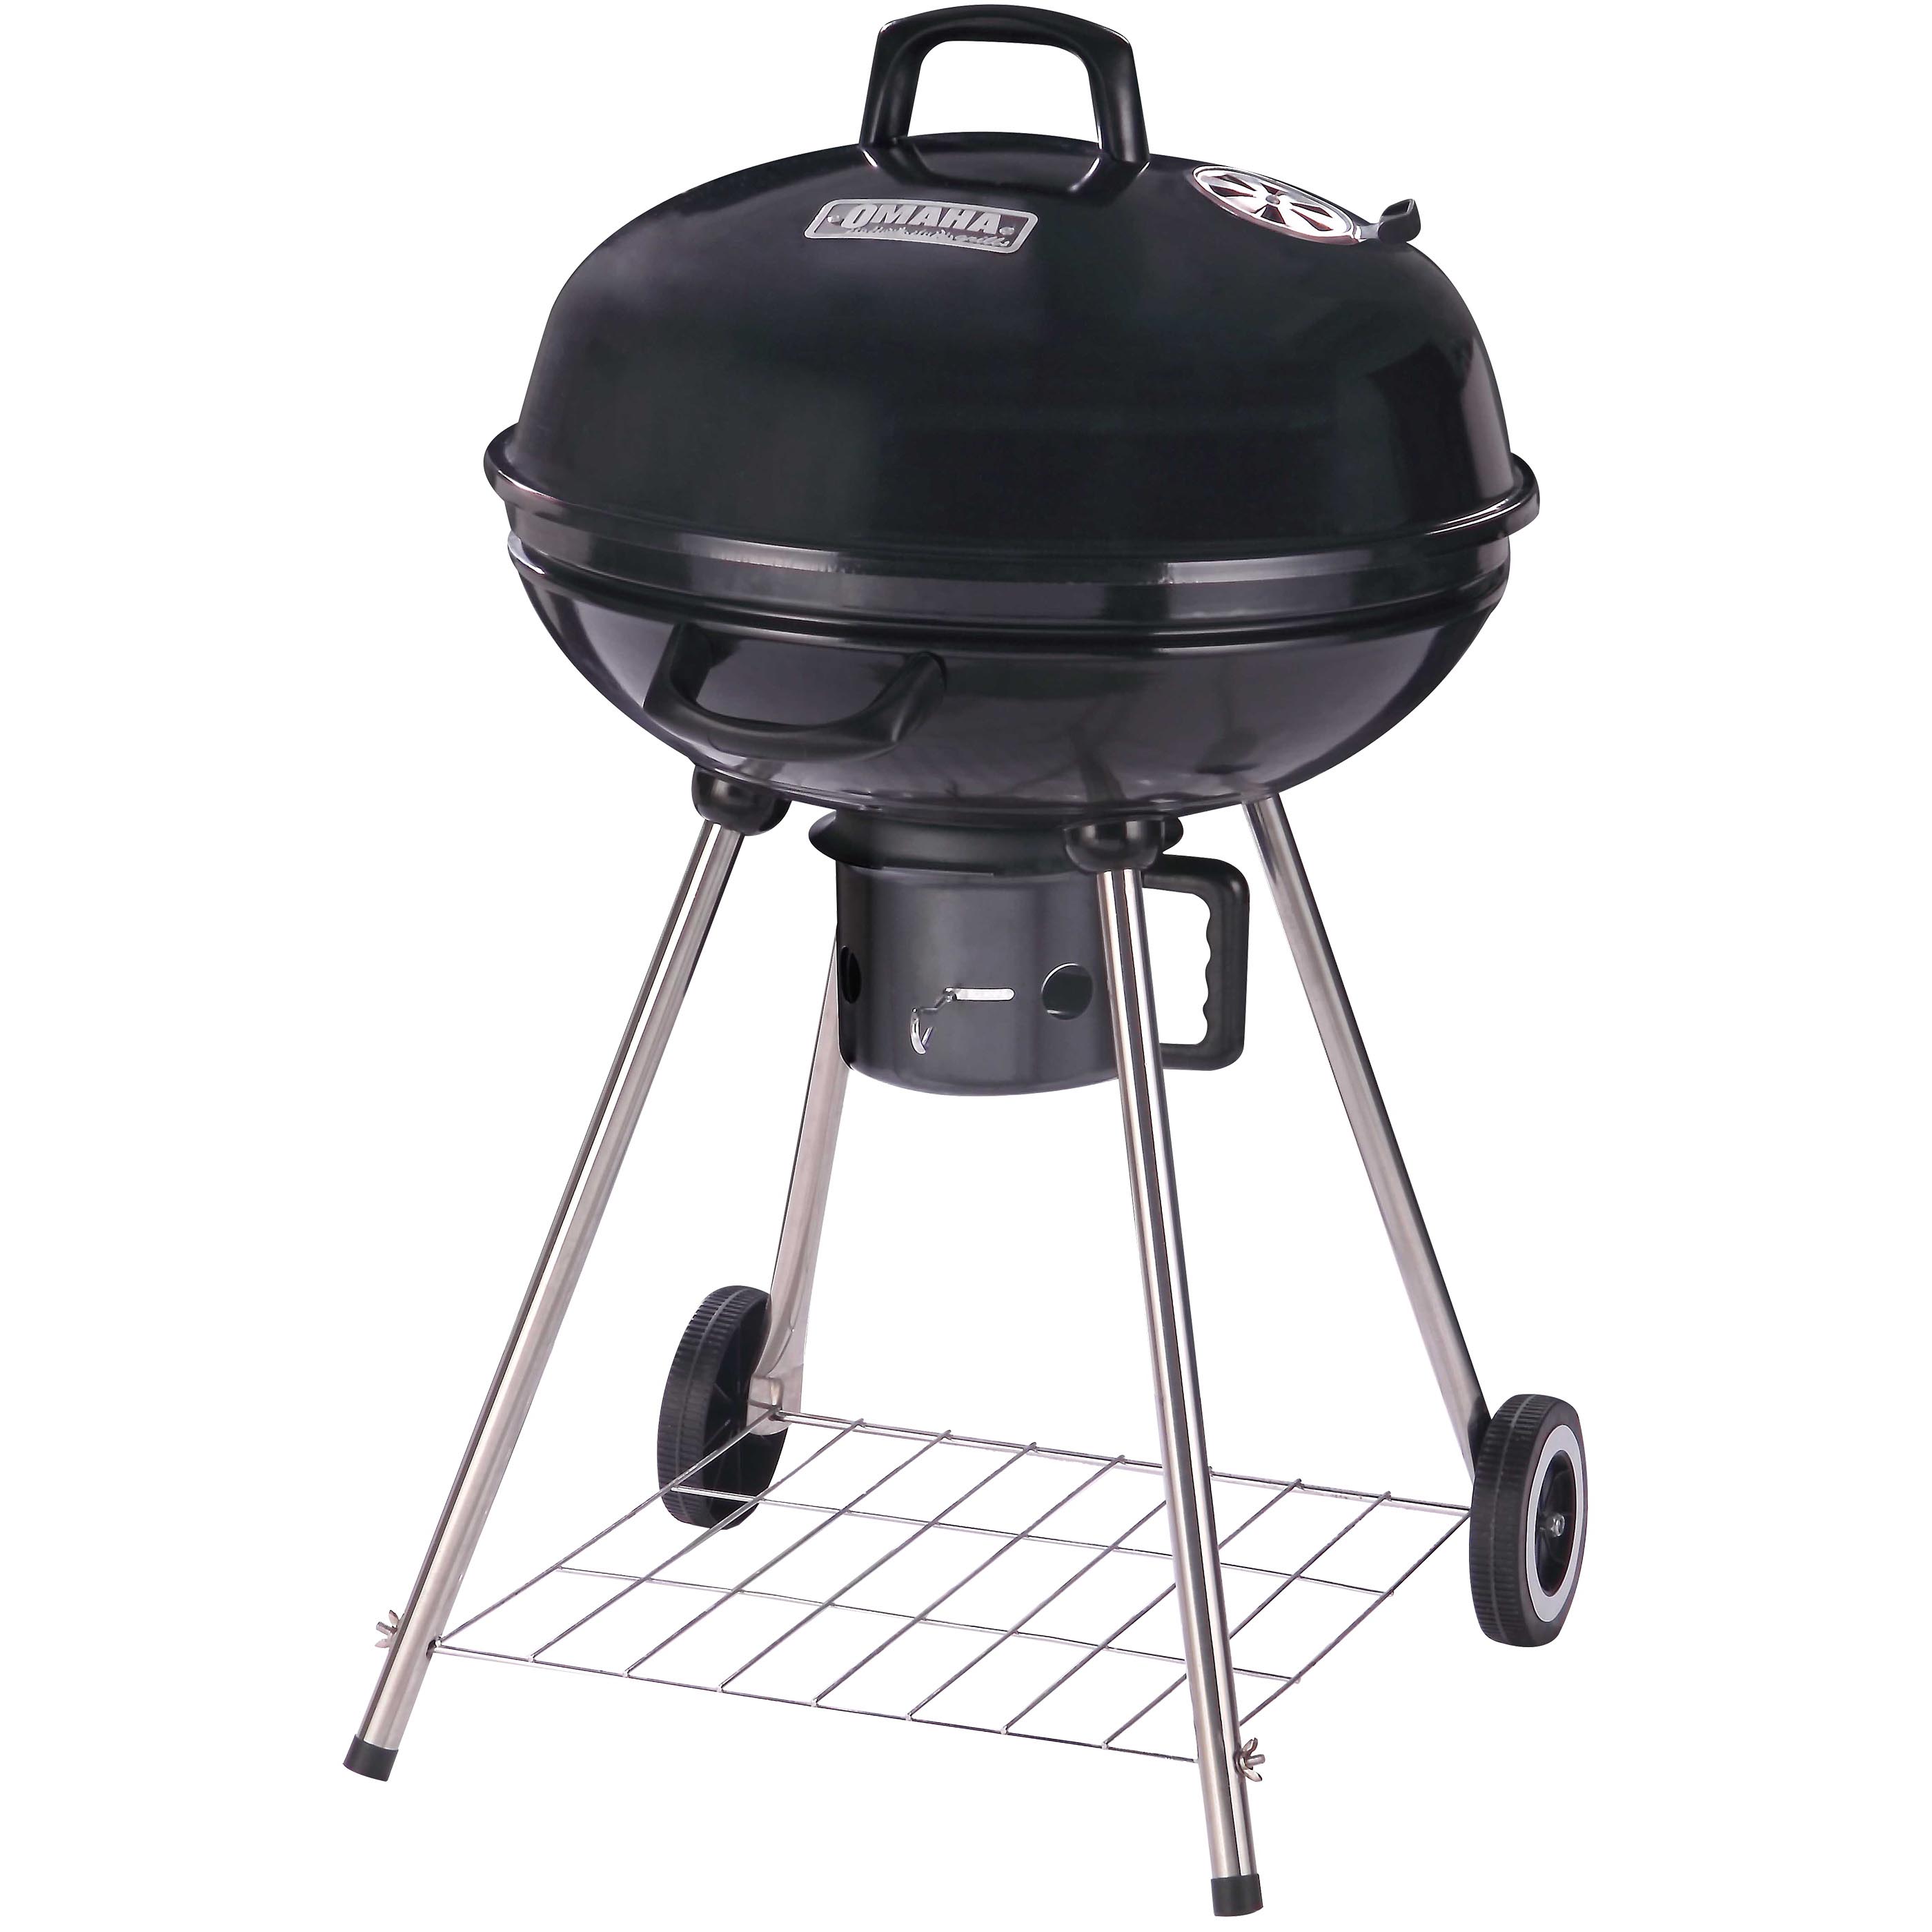 Charcoal Kettle Grill, 2-Grate, 397 sq-in Primary Cooking Surface, Black, Steel Body